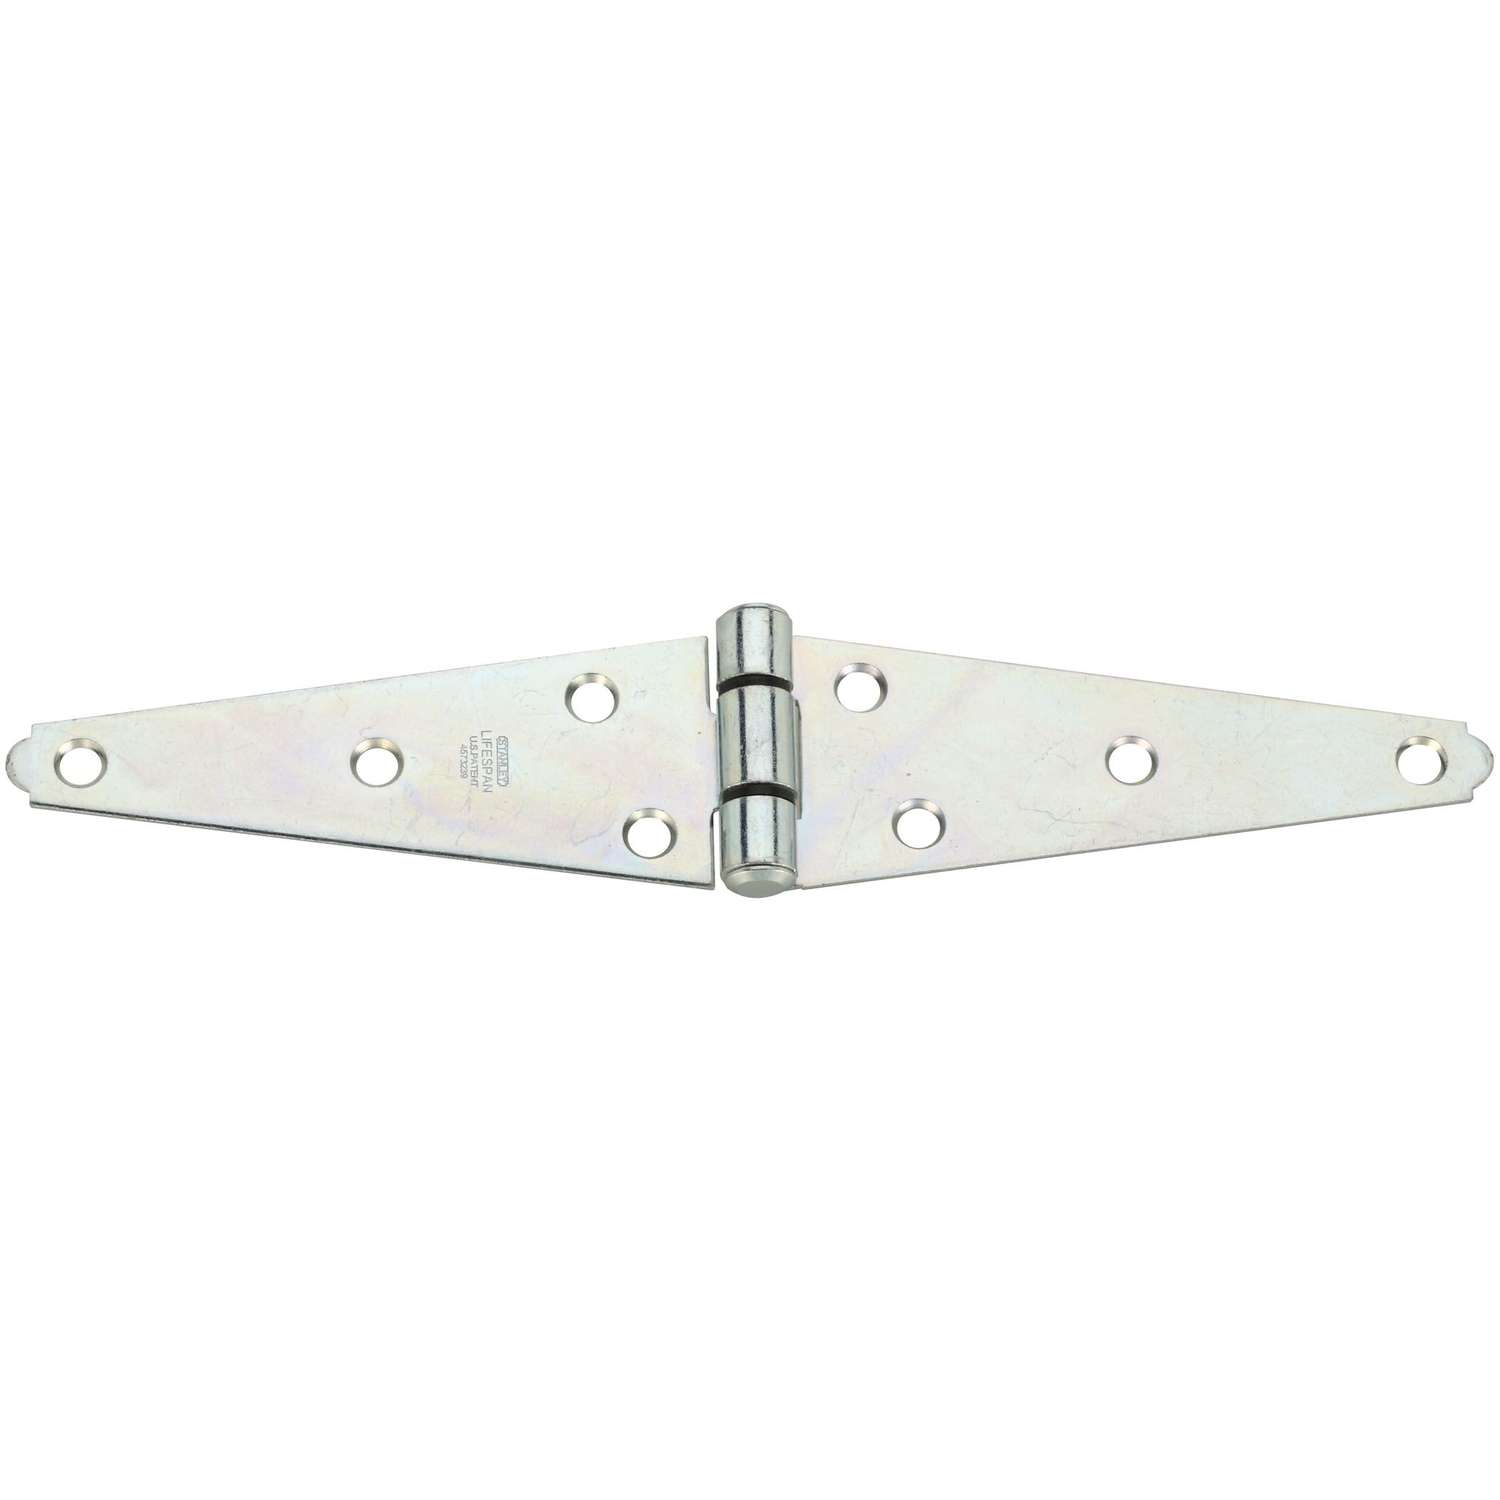  National  Hardware  5 in L Zinc Plated Heavy Strap Hinge 1 